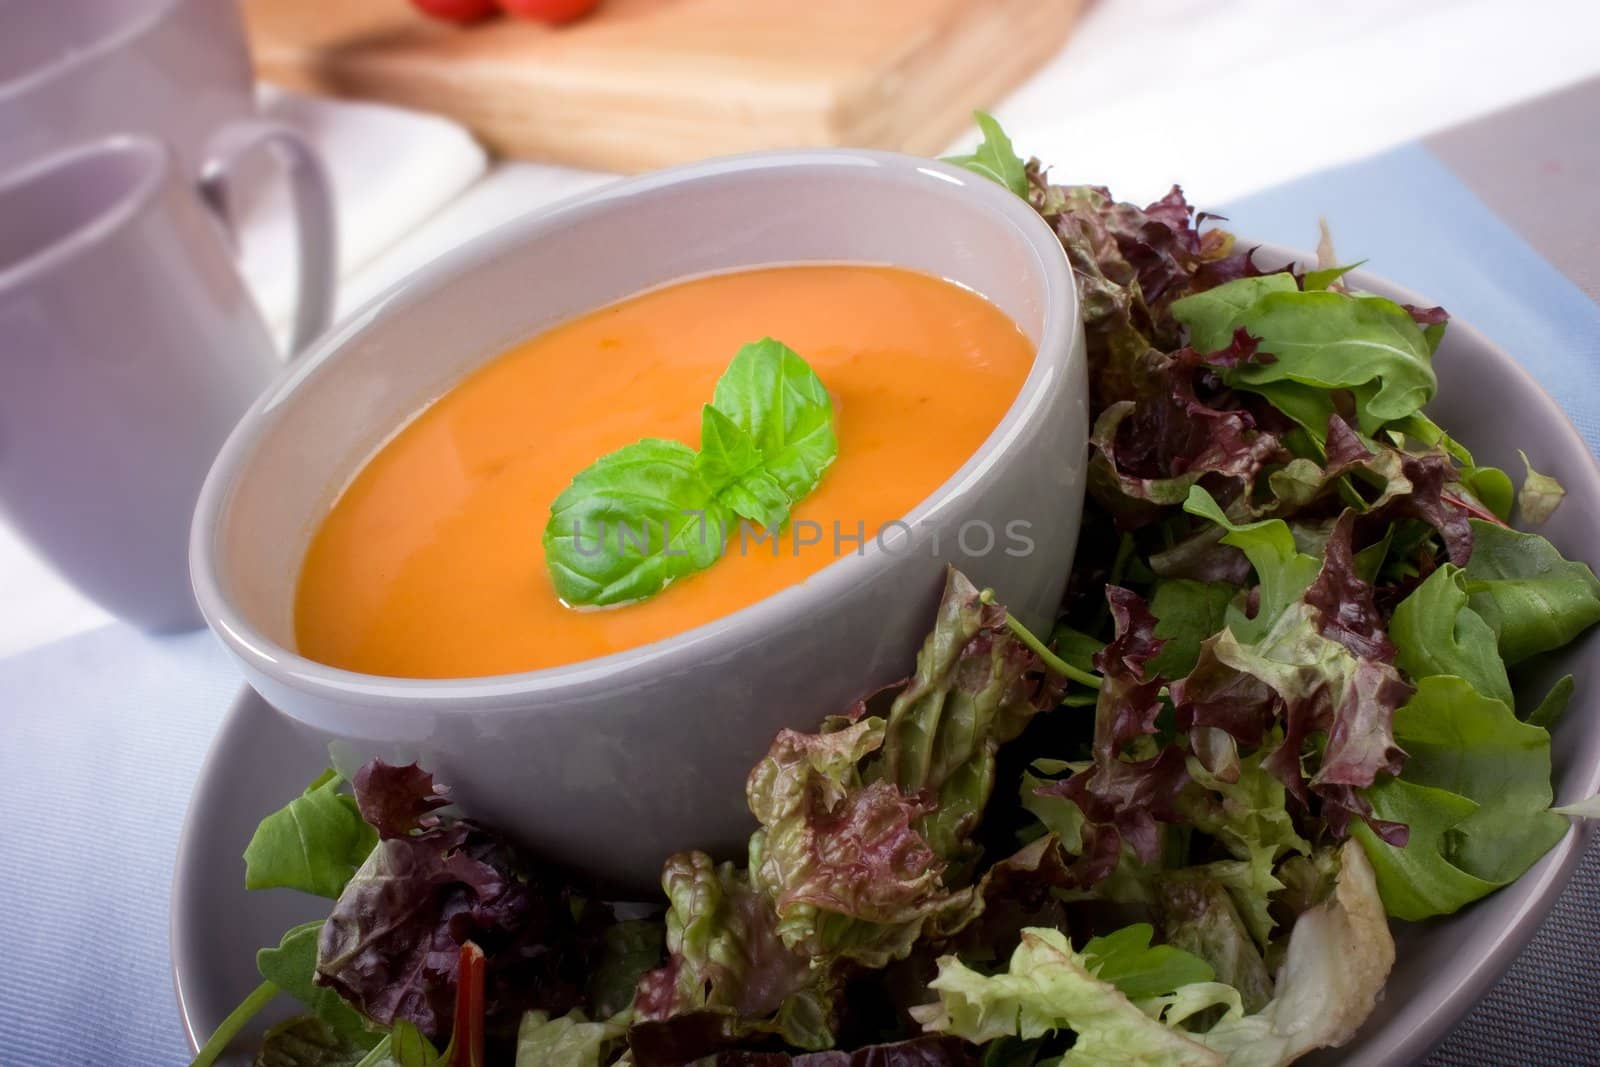 Creamy tomato soup with salad greens and garnished with basil leaves